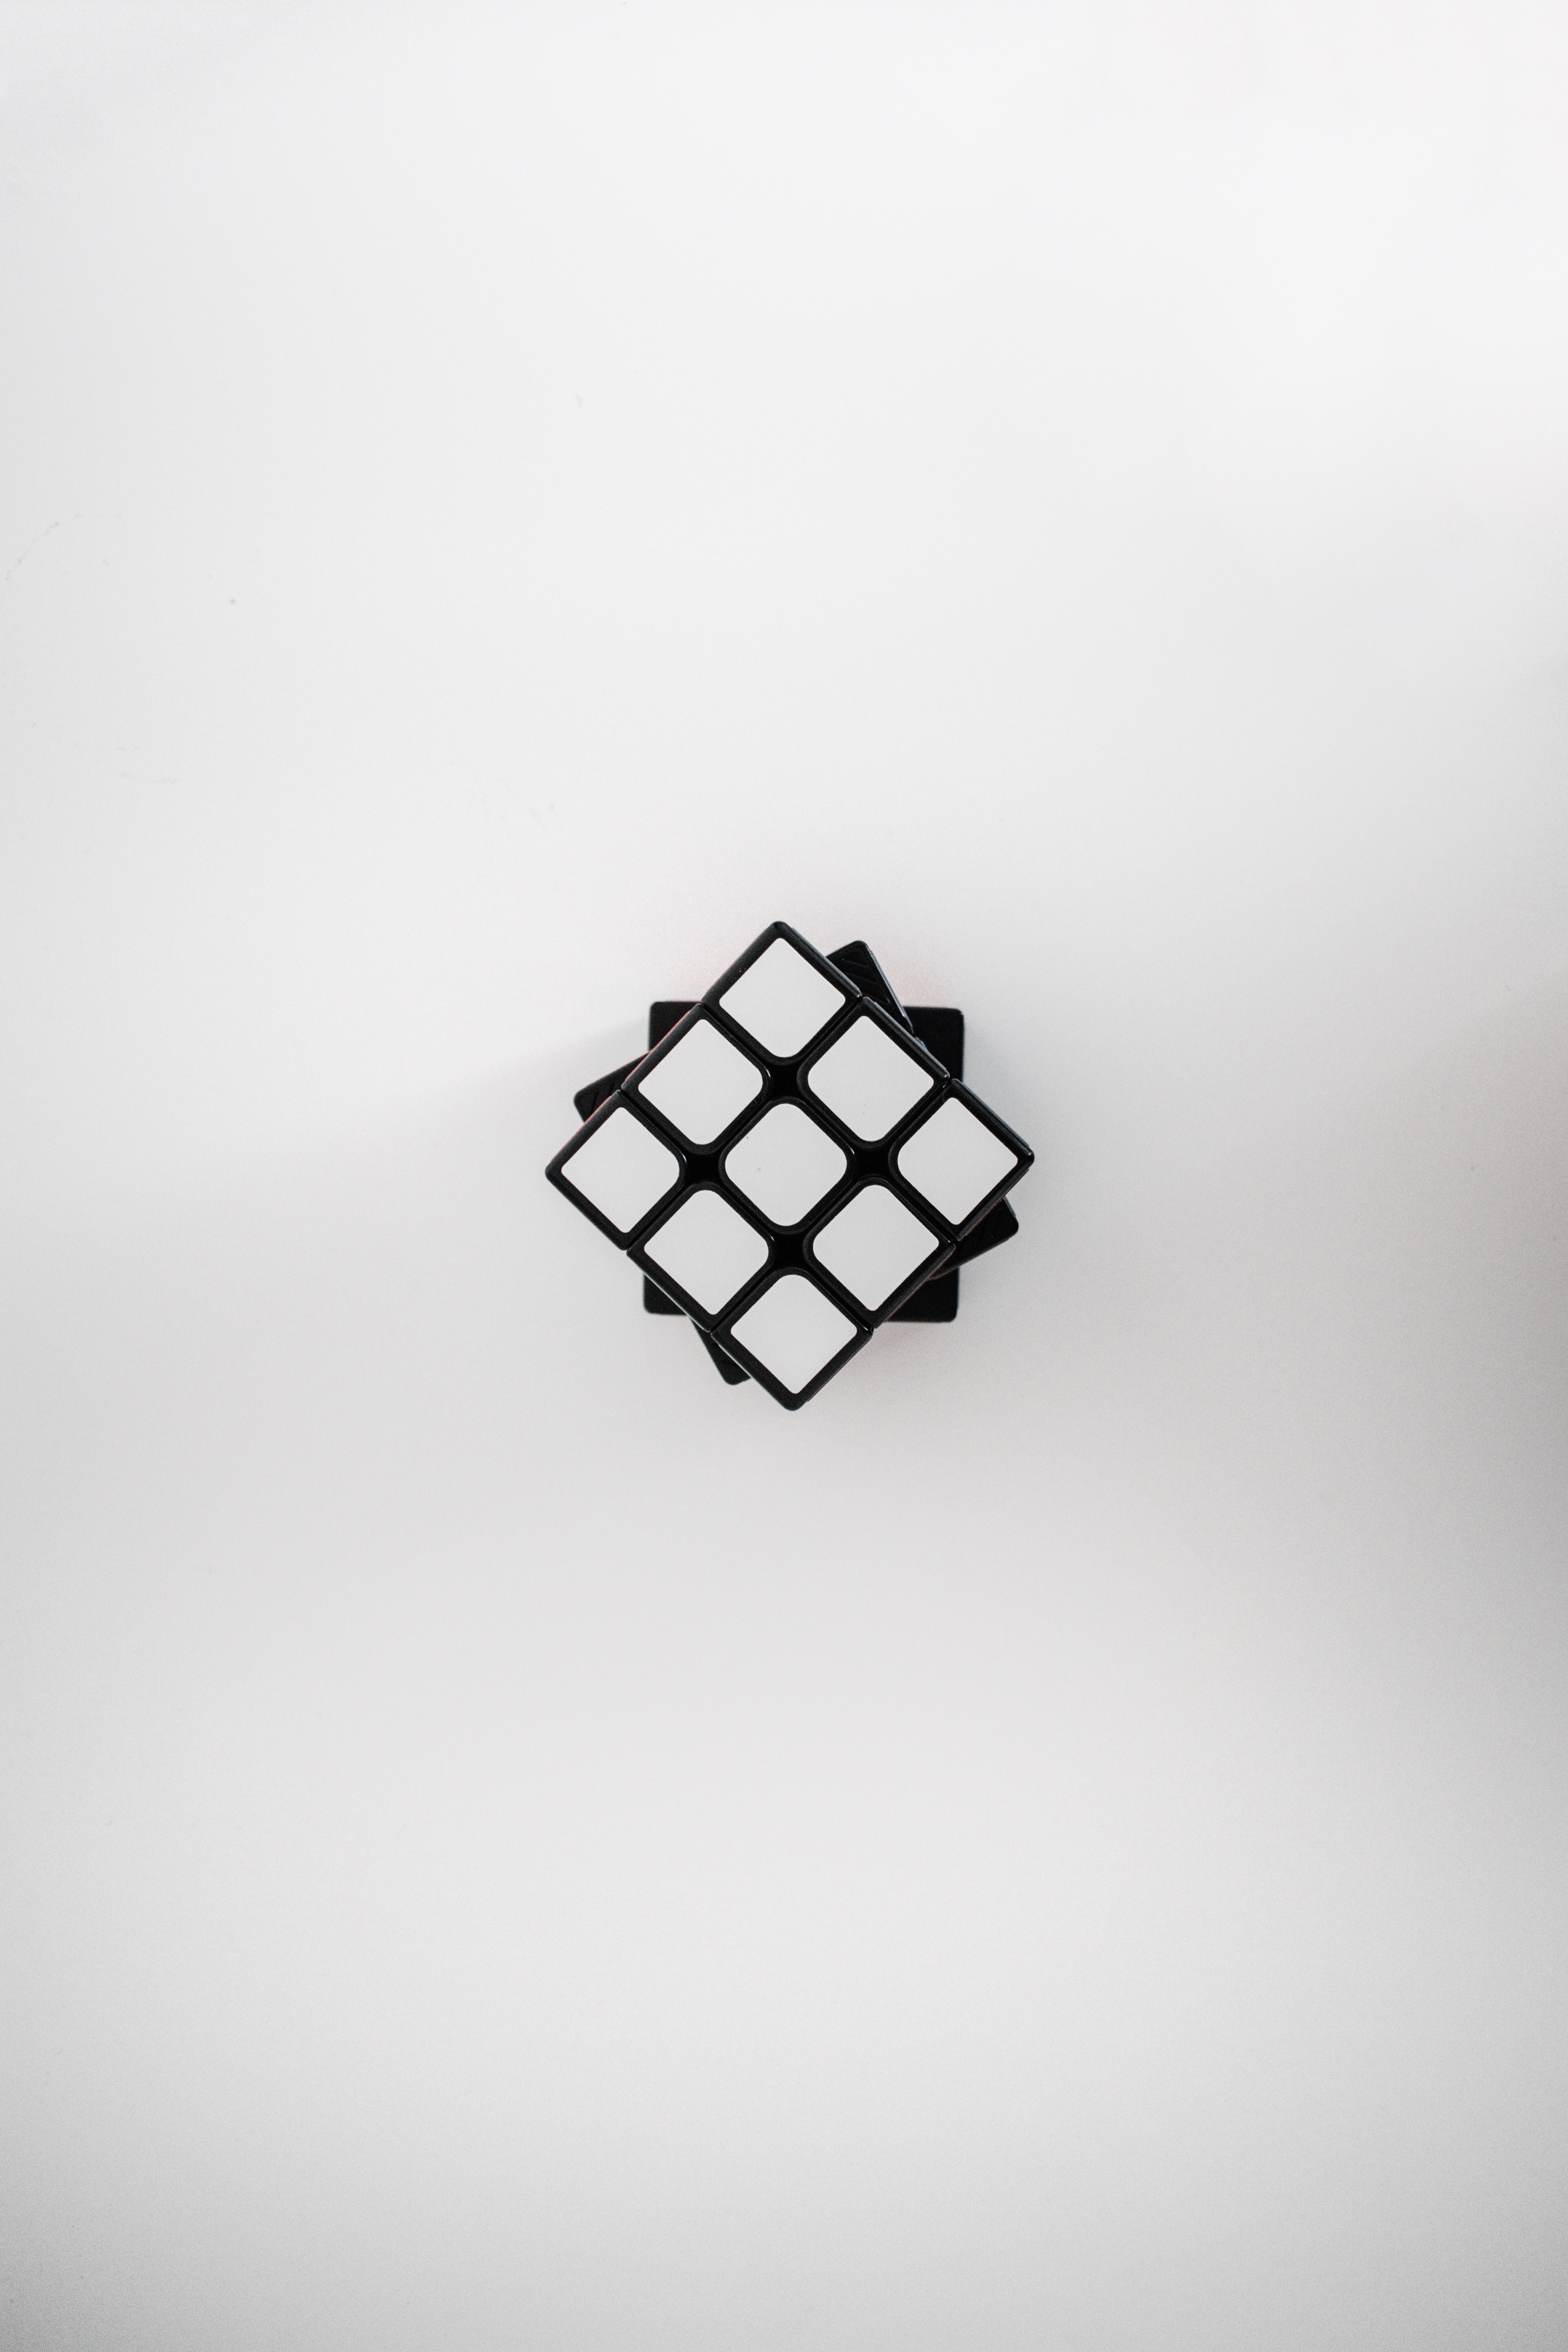 rubik's cube, cube, miscellanea, white, view from above, miscellaneous Full HD